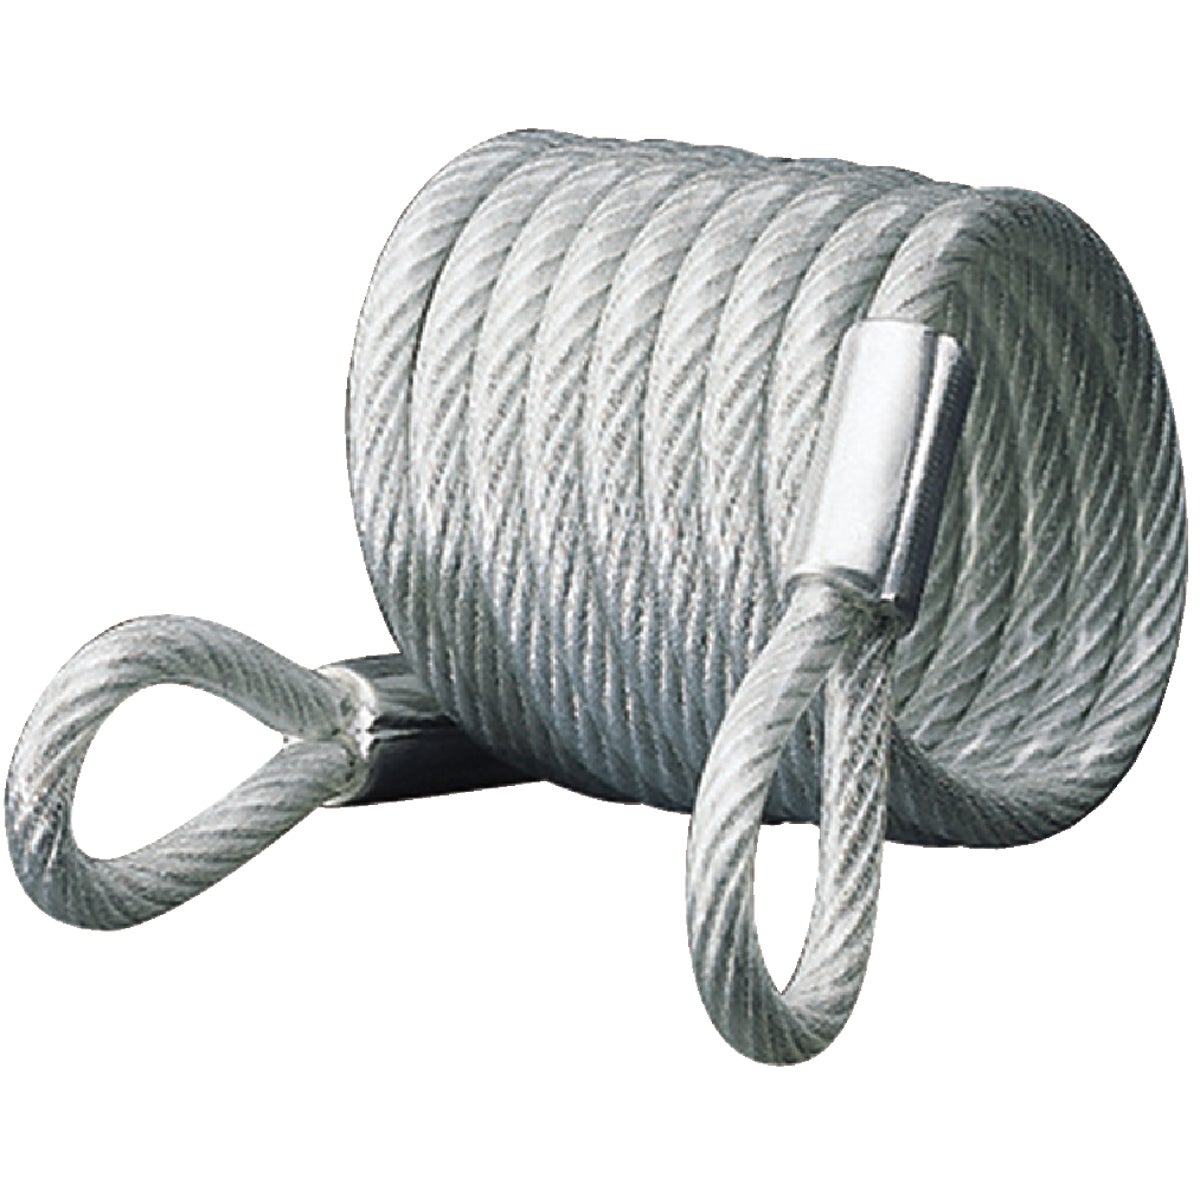 Master Lock 6 Ft. x 1/4 In. Self-Coiling Cable